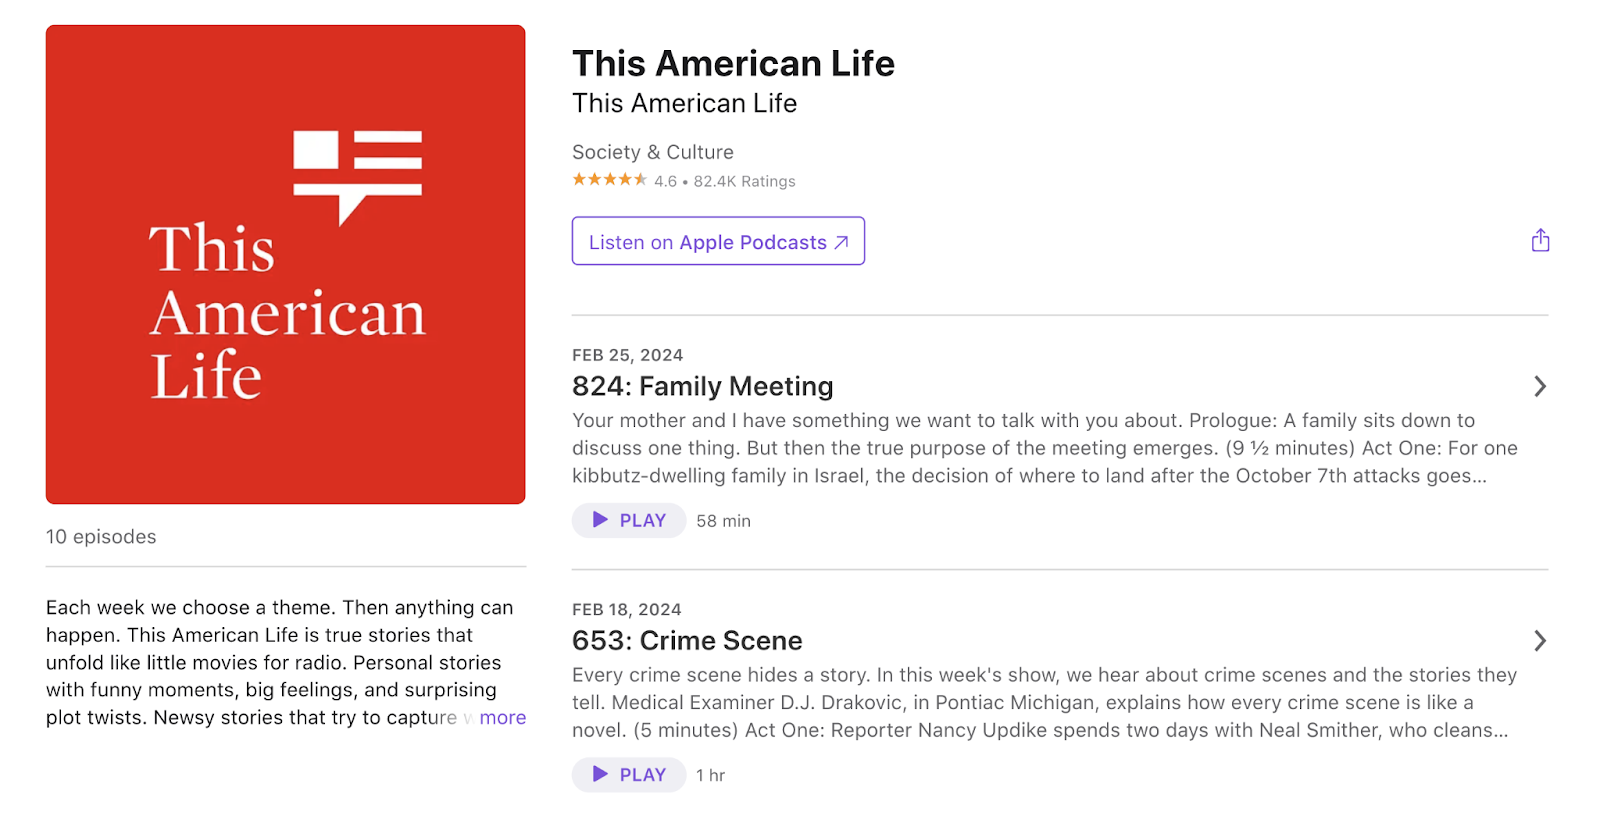 The American Life podcast